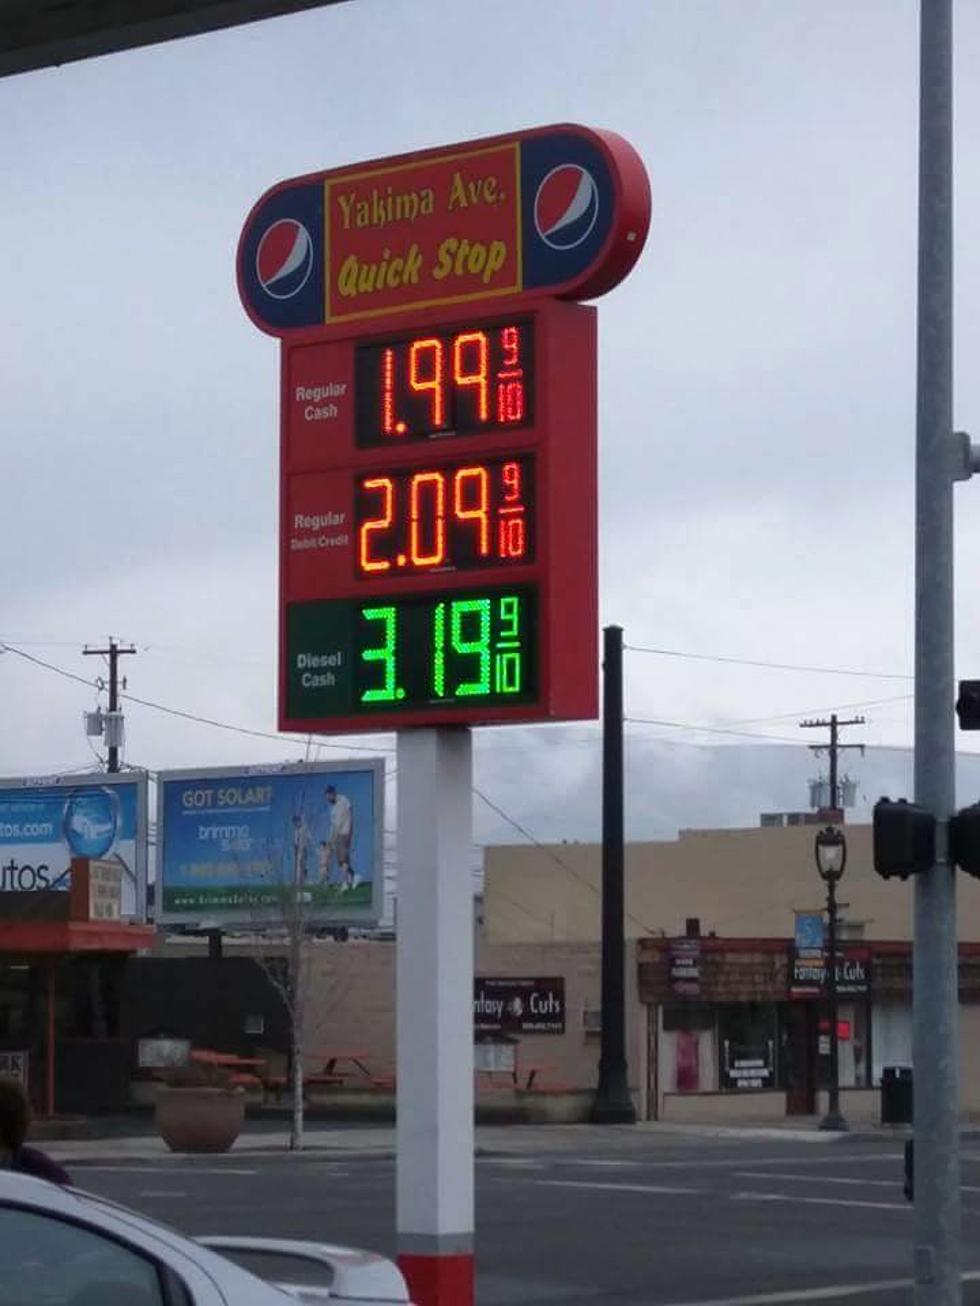 Yakima Avenue Quick Stop Has Gas At $1.99, That Is Crazy